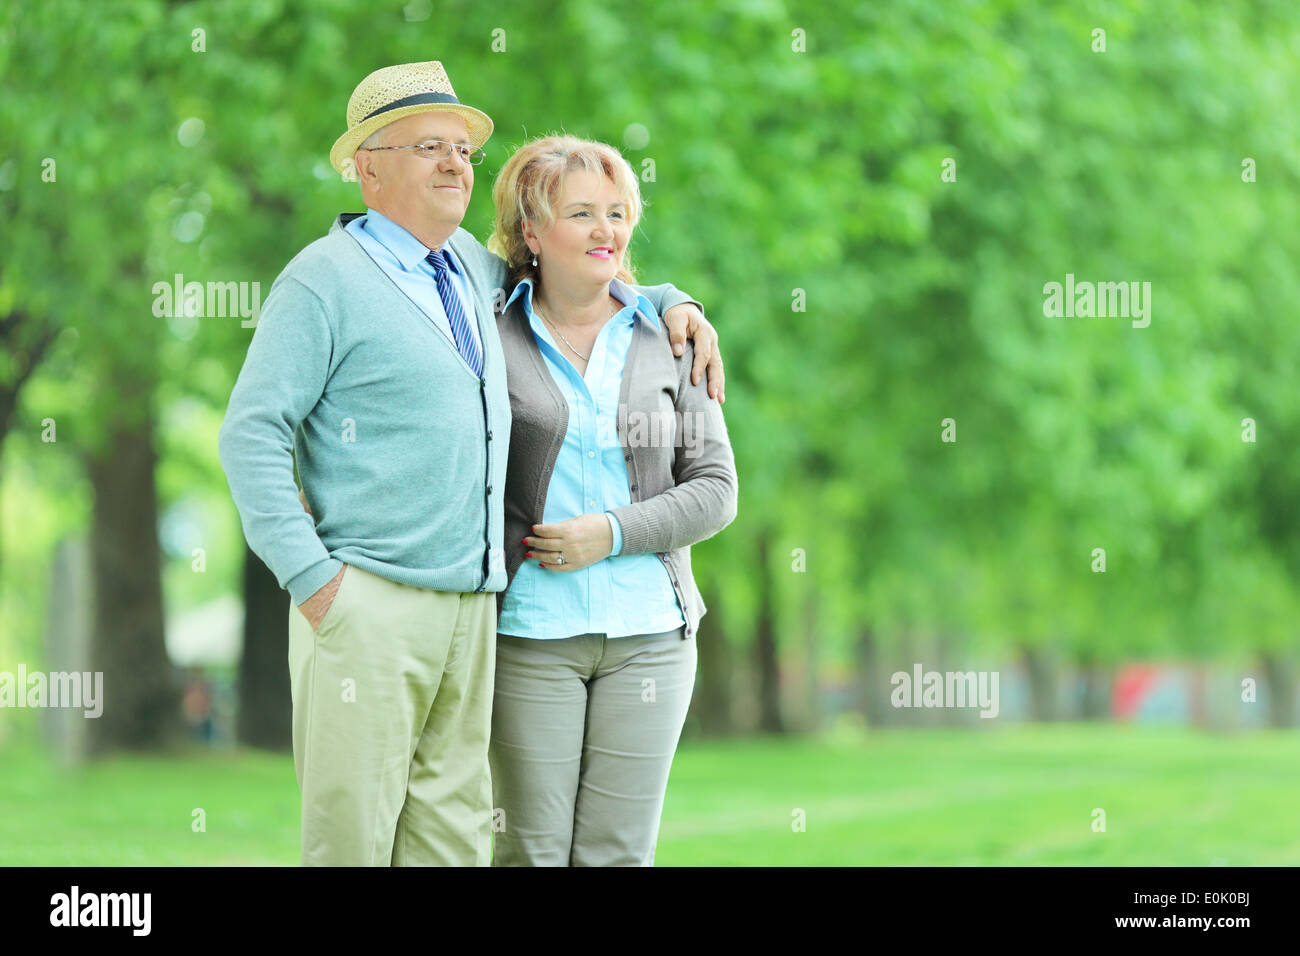 Mature couple standing in a park and looking at something Stock Photo